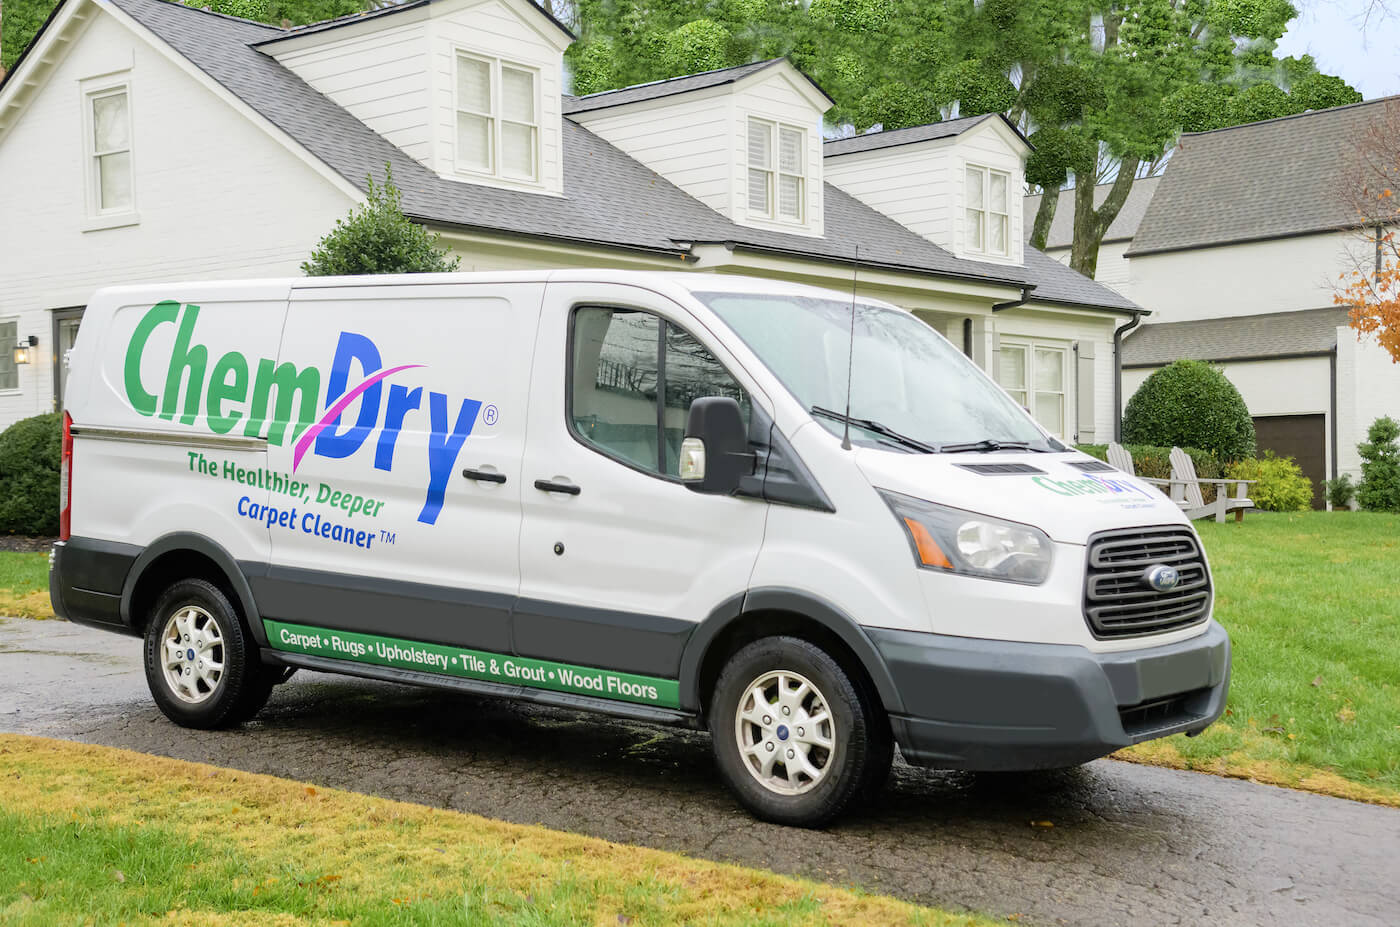 Chem-Dry van in a driveway- the healthier, deeper carpet cleaner